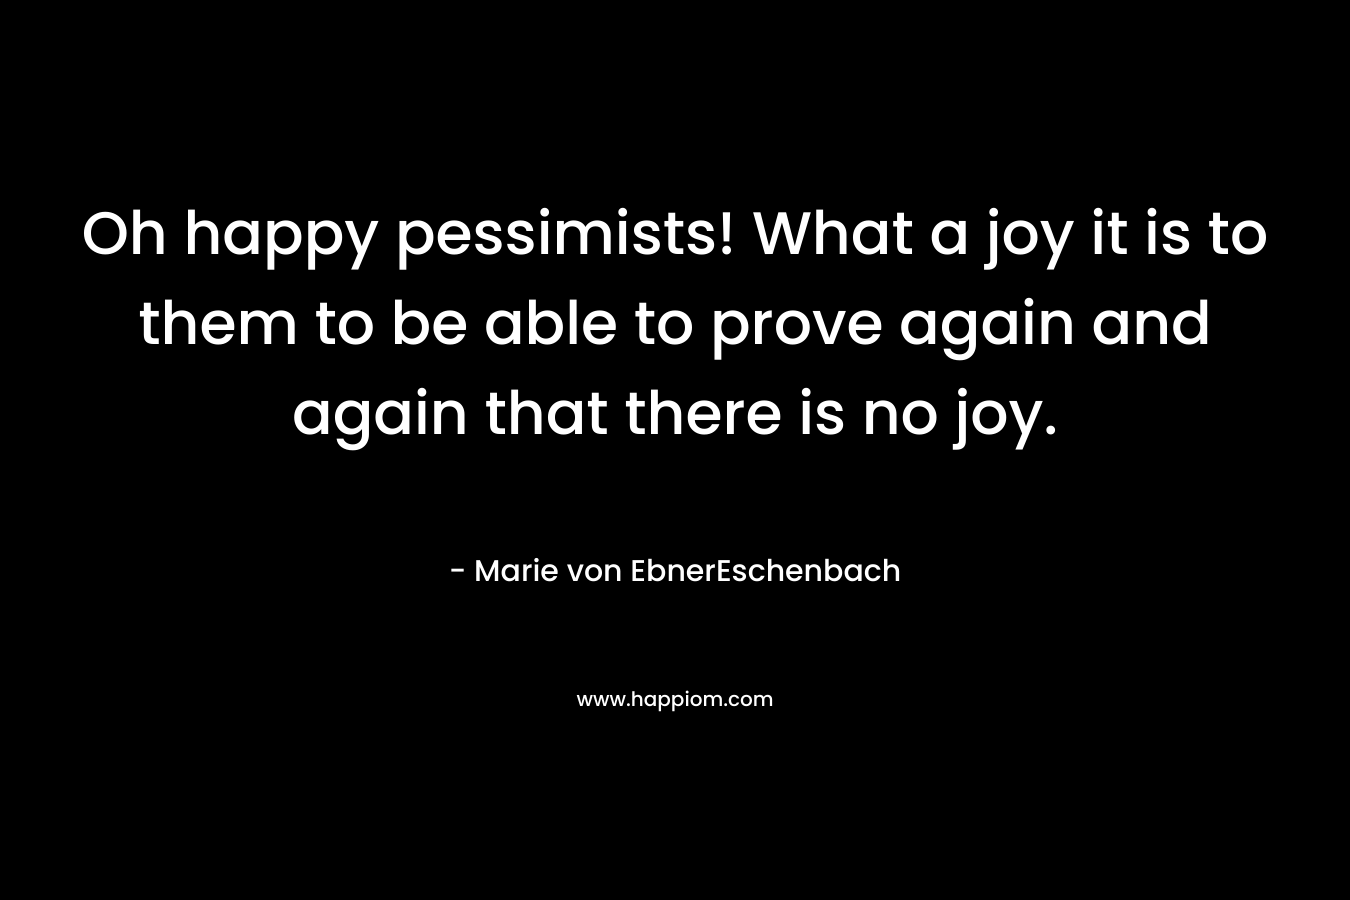 Oh happy pessimists! What a joy it is to them to be able to prove again and again that there is no joy.